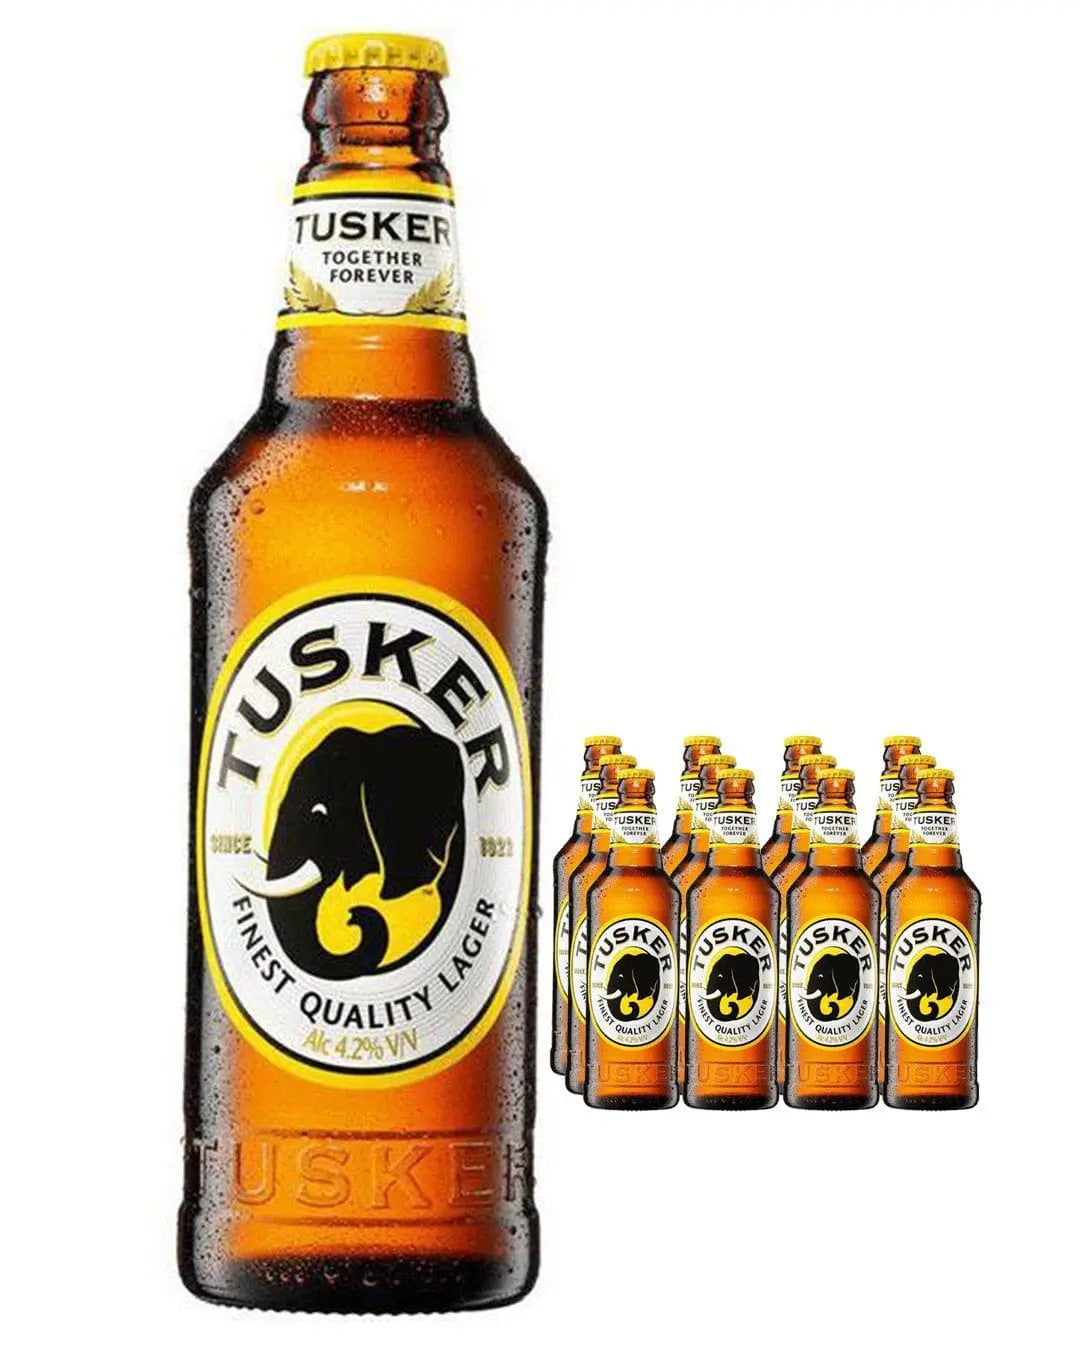 Tusker Finest Quality Lager Multipack, 12 x 500 ml Beer